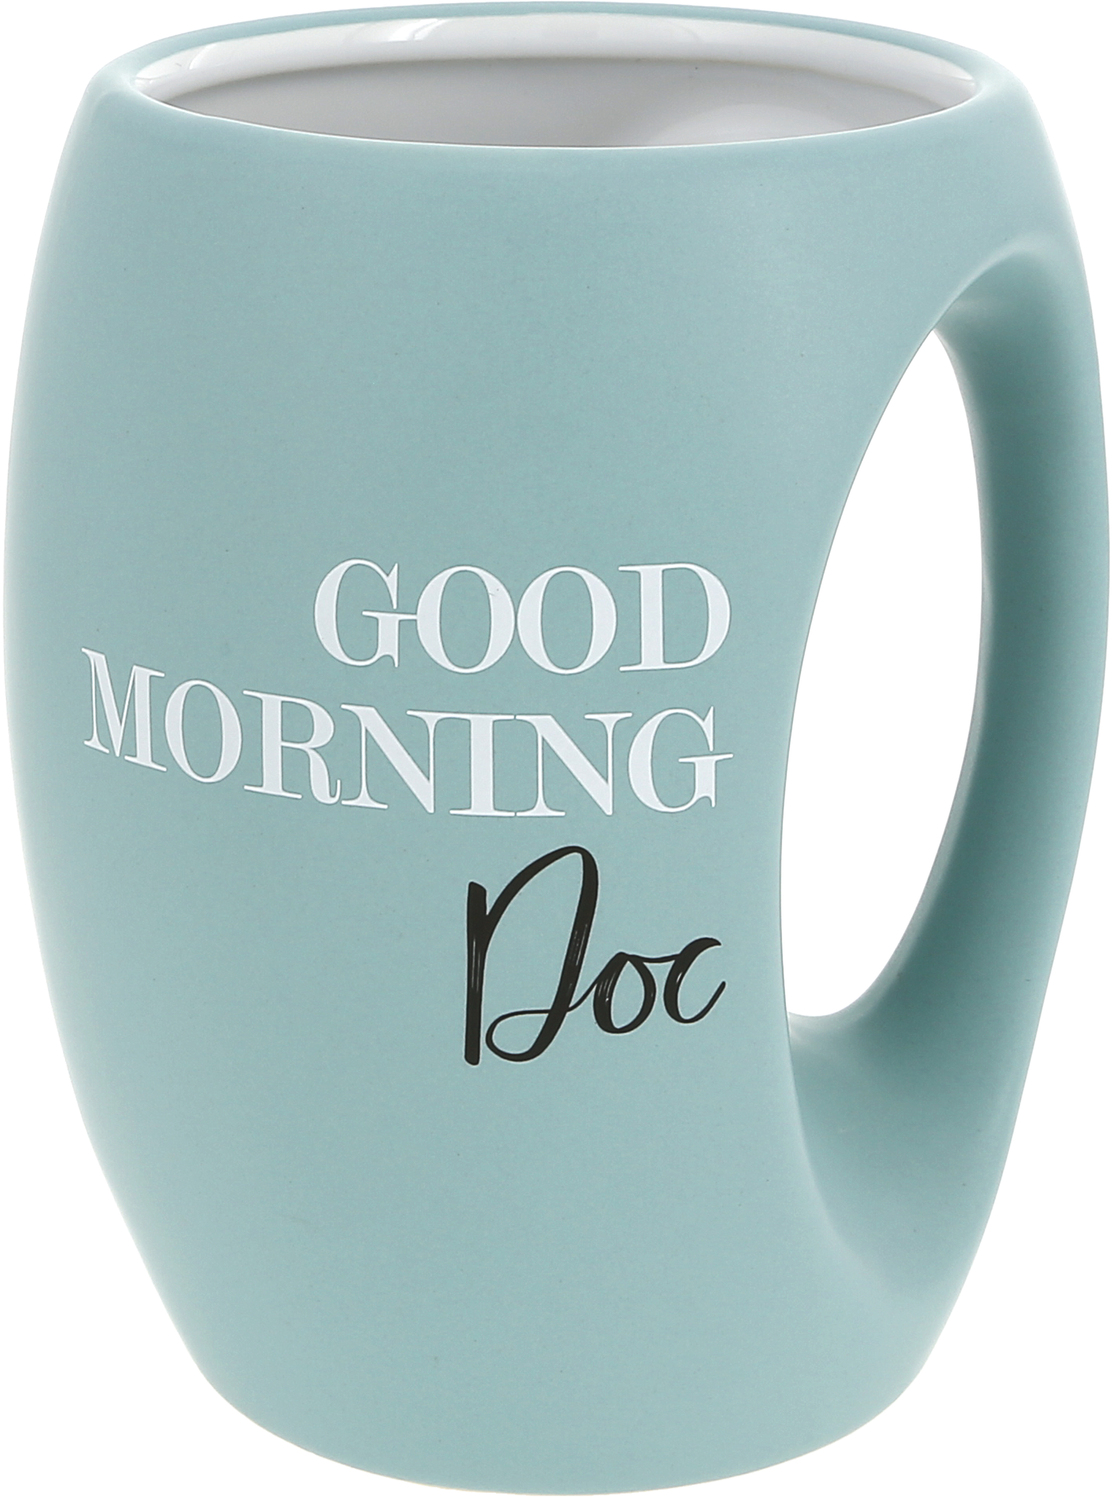 Doc by Good Morning - Doc - 16 oz Cup